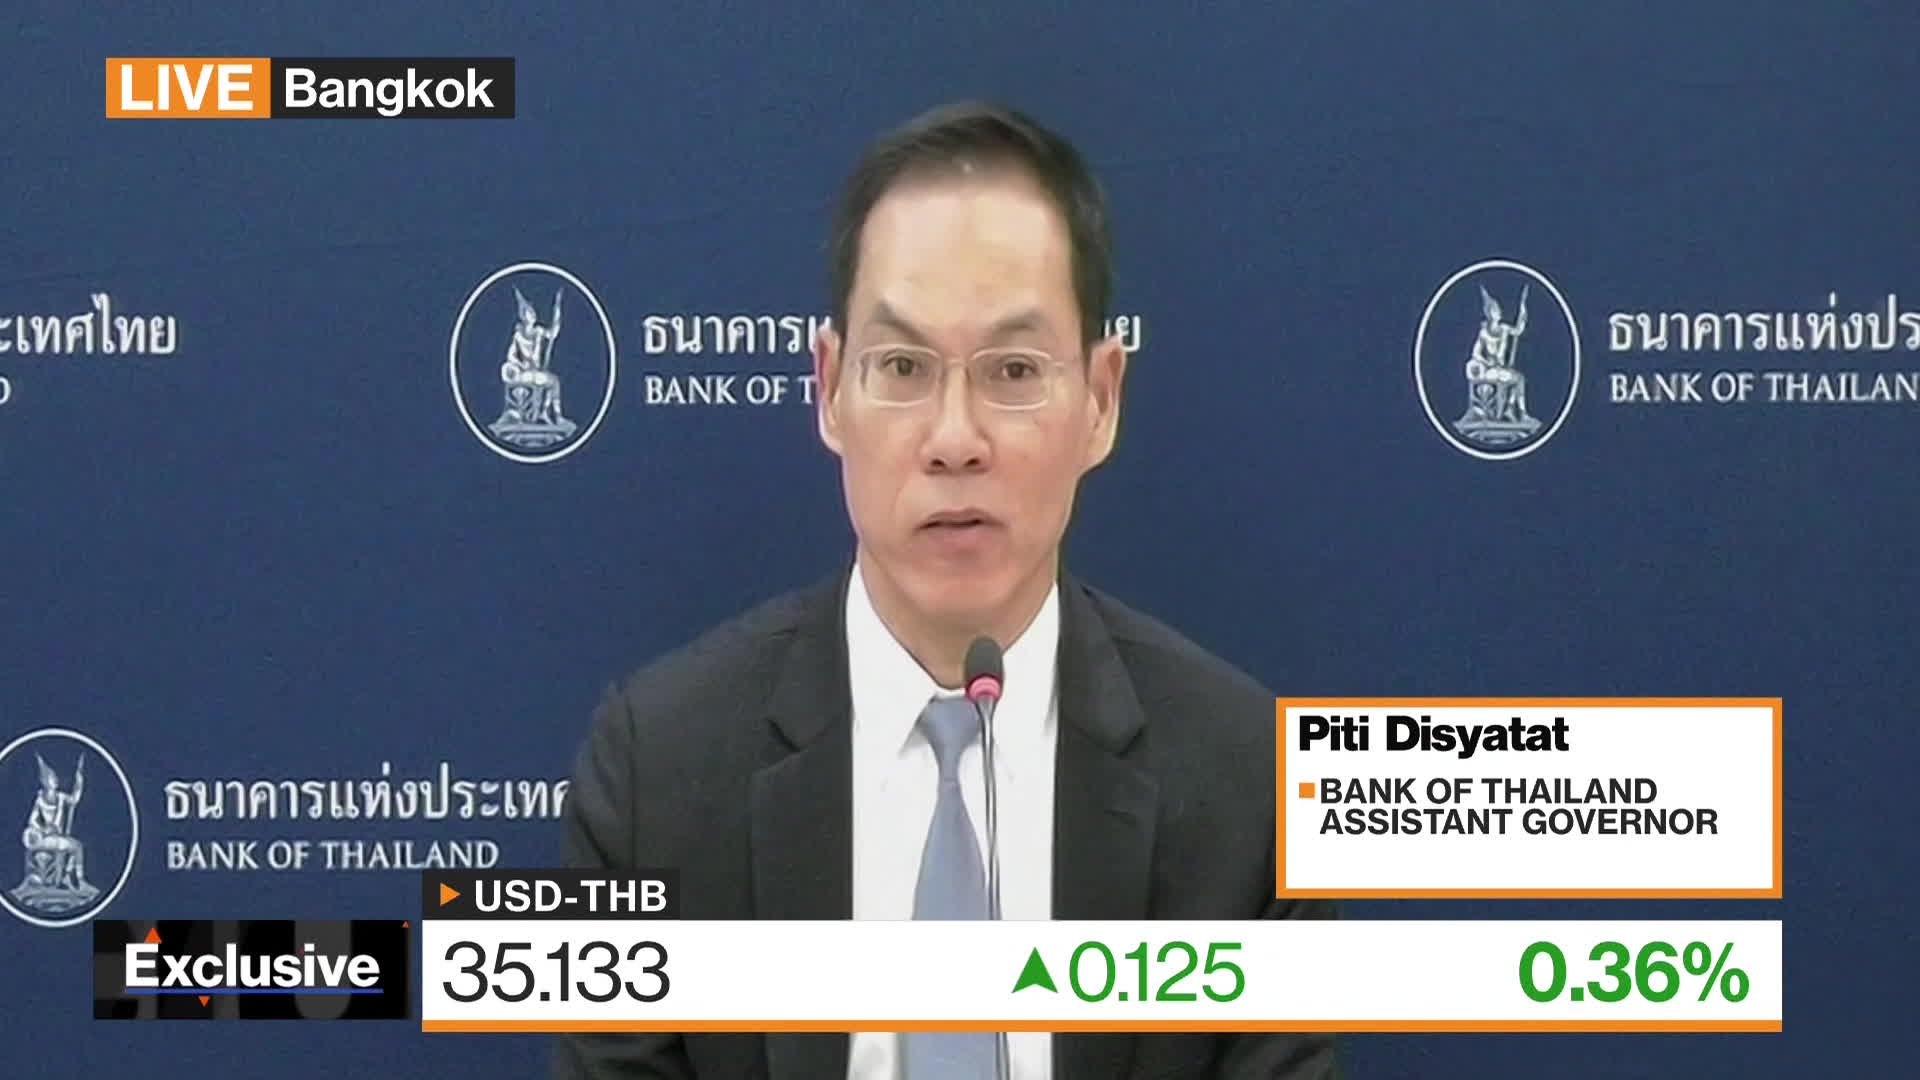 Watch BOT: Low Inflation Has No Implication So Far on Monetary